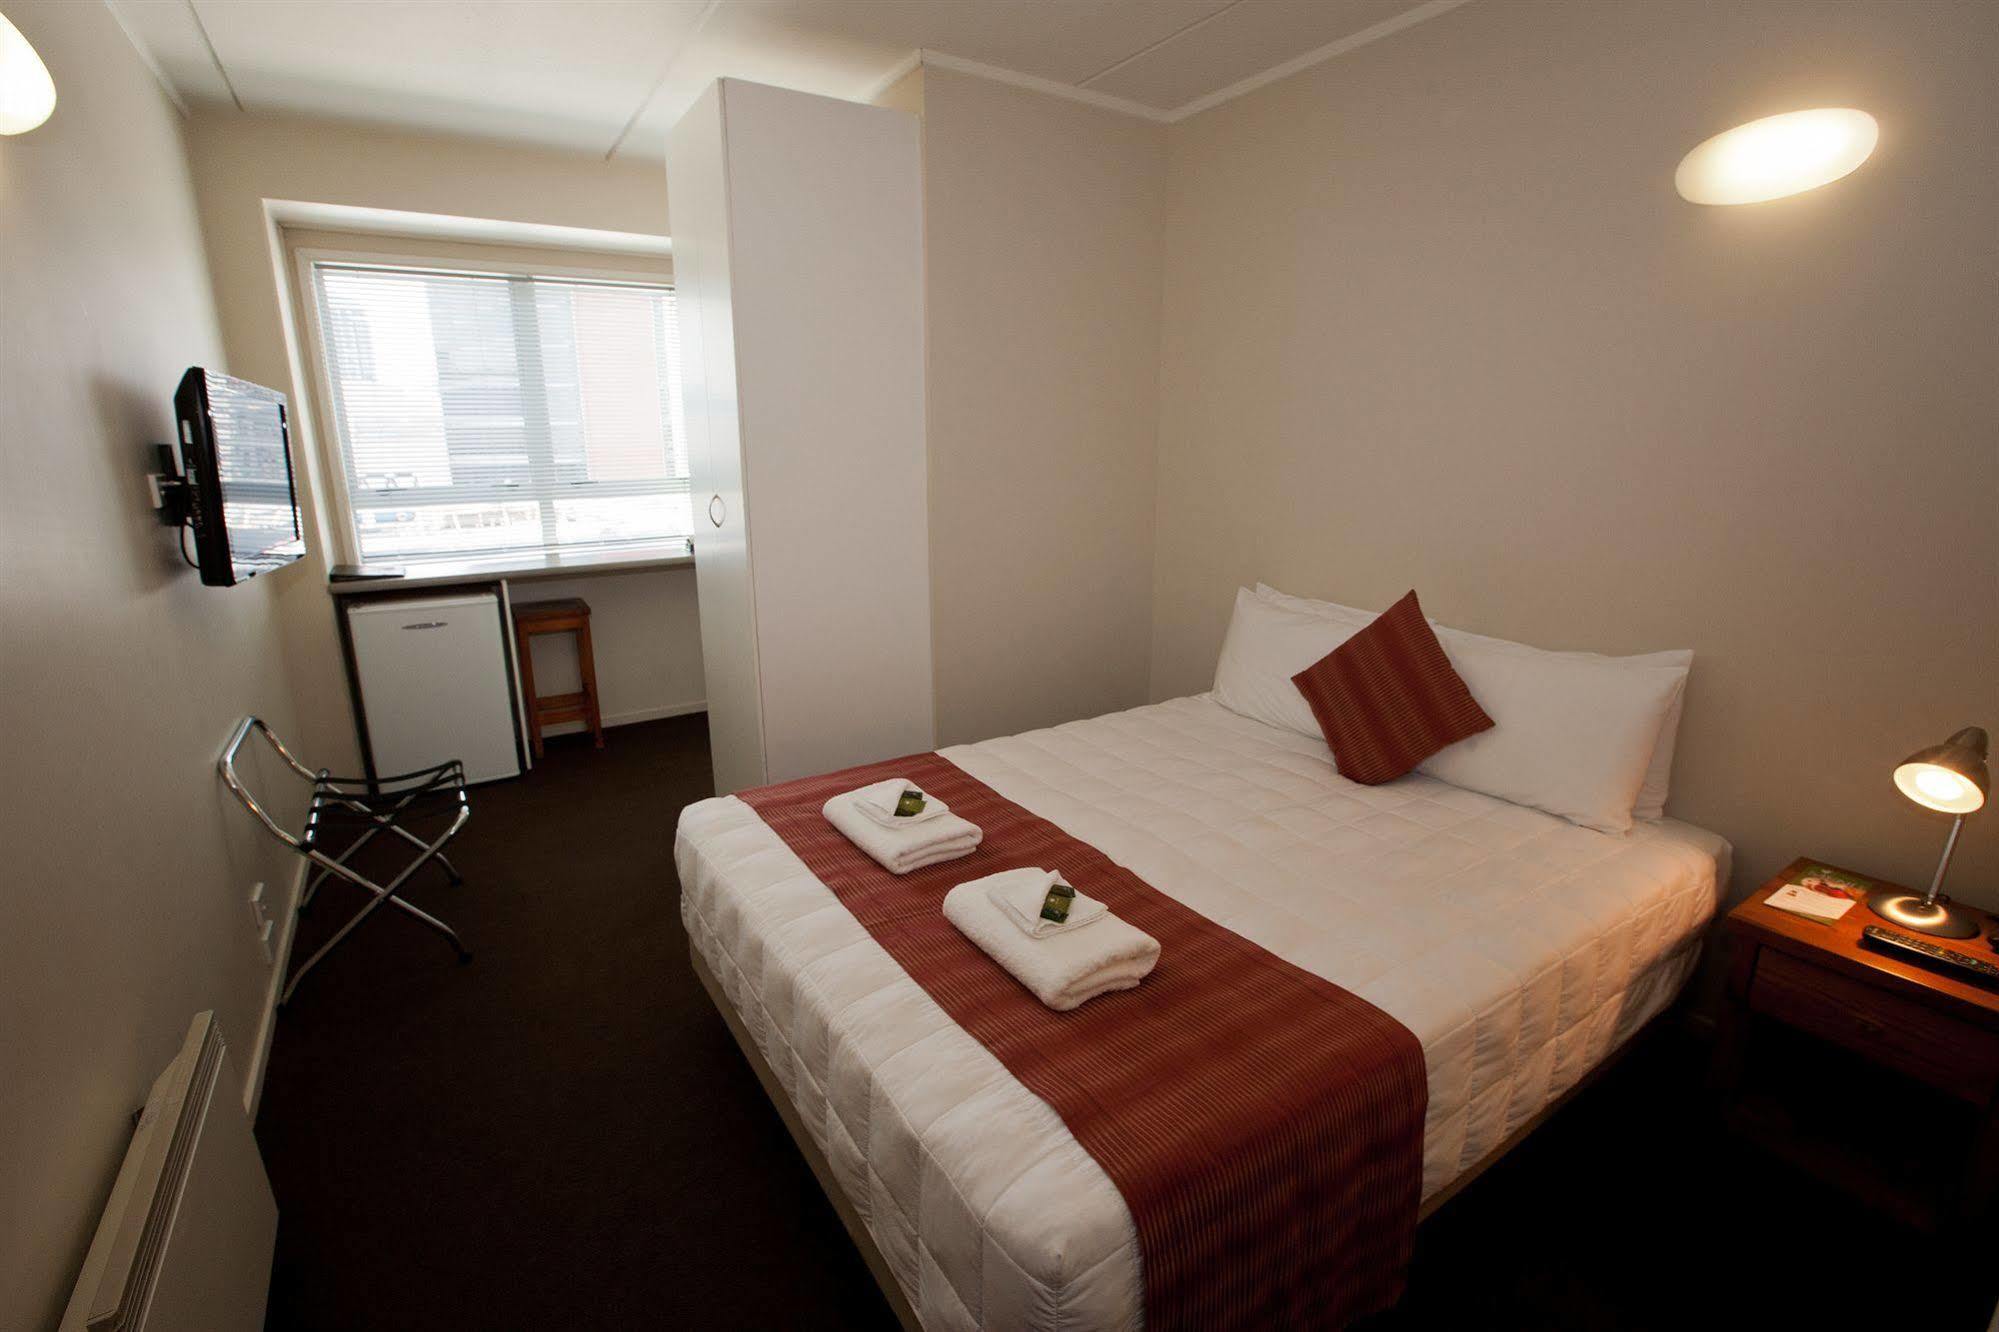 City Lodge Accommodation Auckland Exterior foto